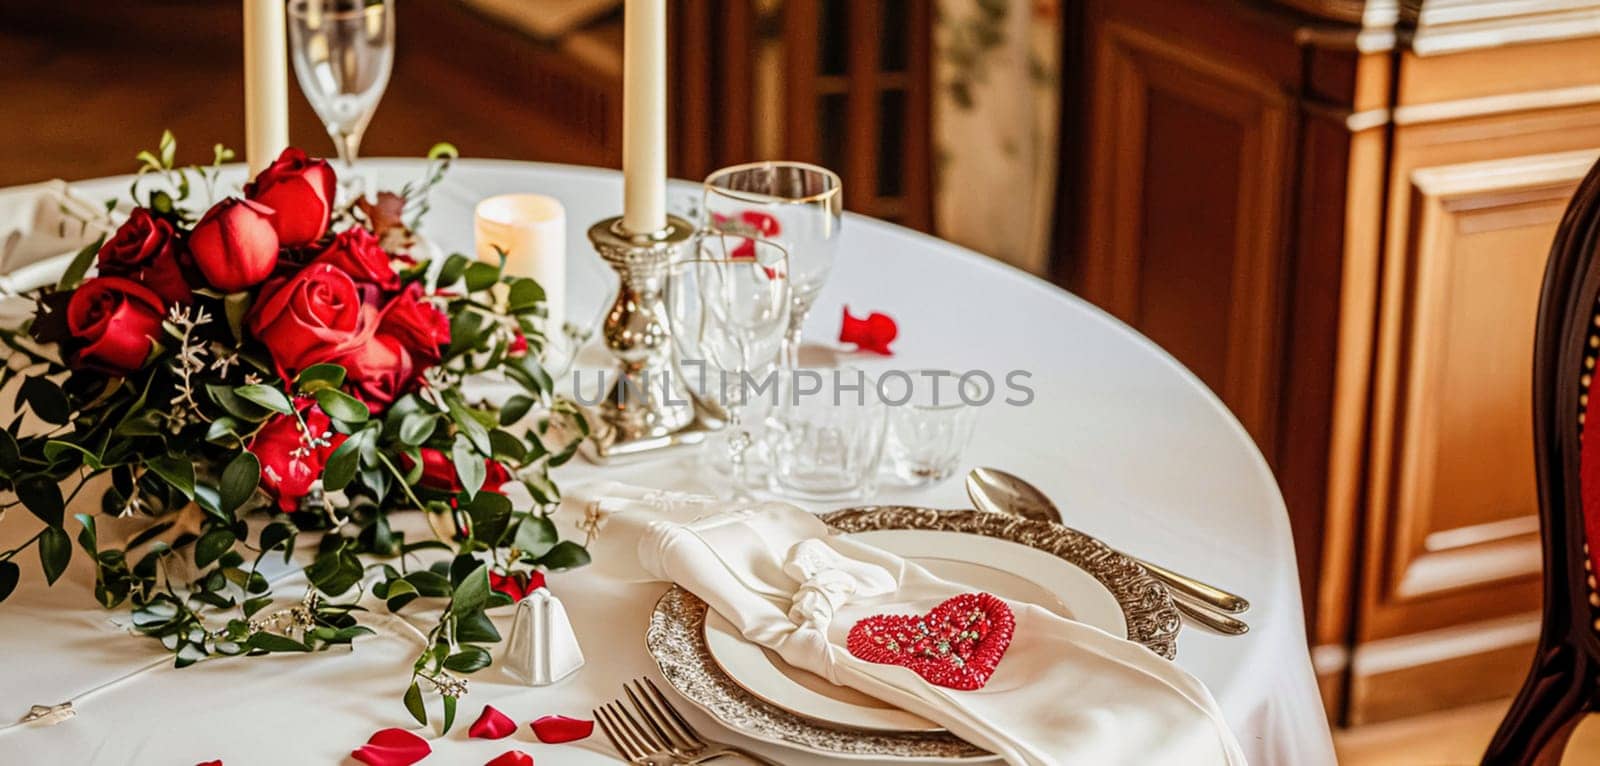 Festive table setting with cutlery, candles and beautiful red flowers in a vase.